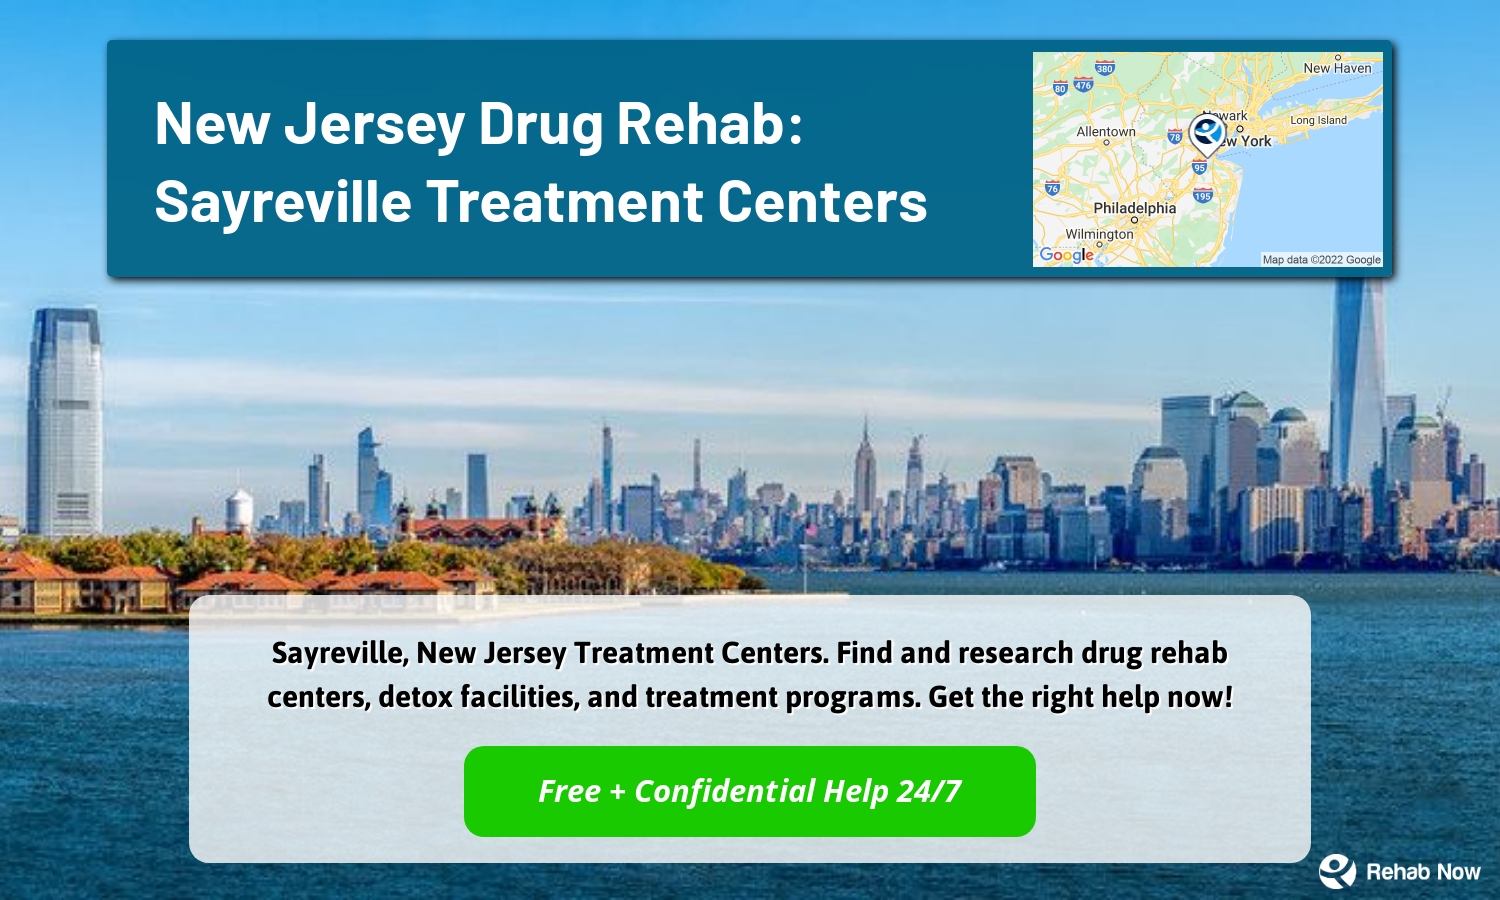 Sayreville, New Jersey Treatment Centers. Find and research drug rehab centers, detox facilities, and treatment programs. Get the right help now!